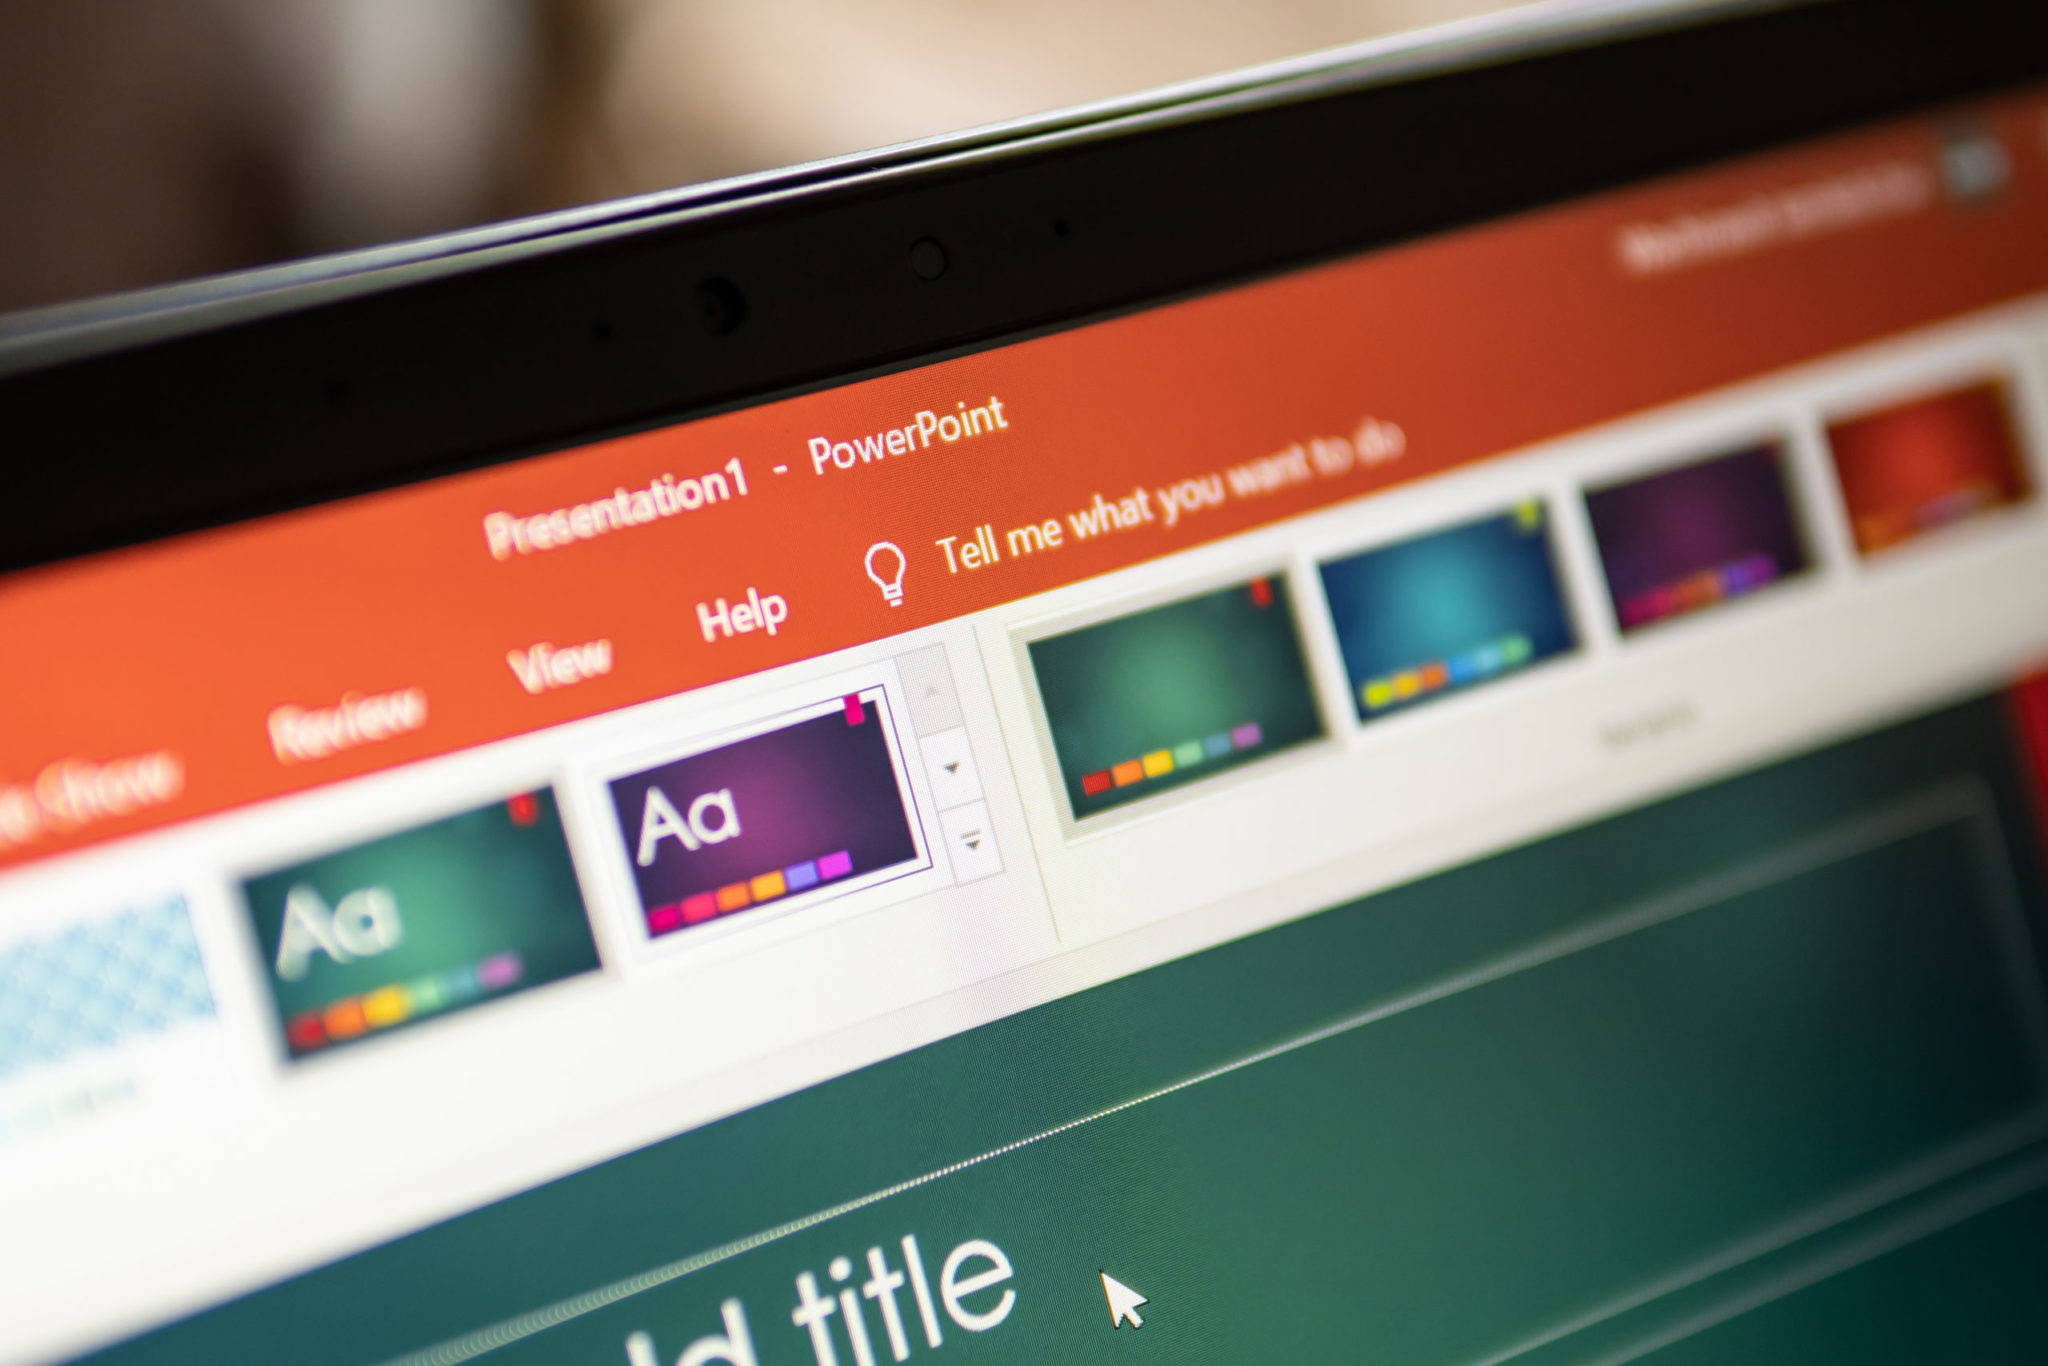 Best Practices for Making Your PowerPoint Presentation Accessible